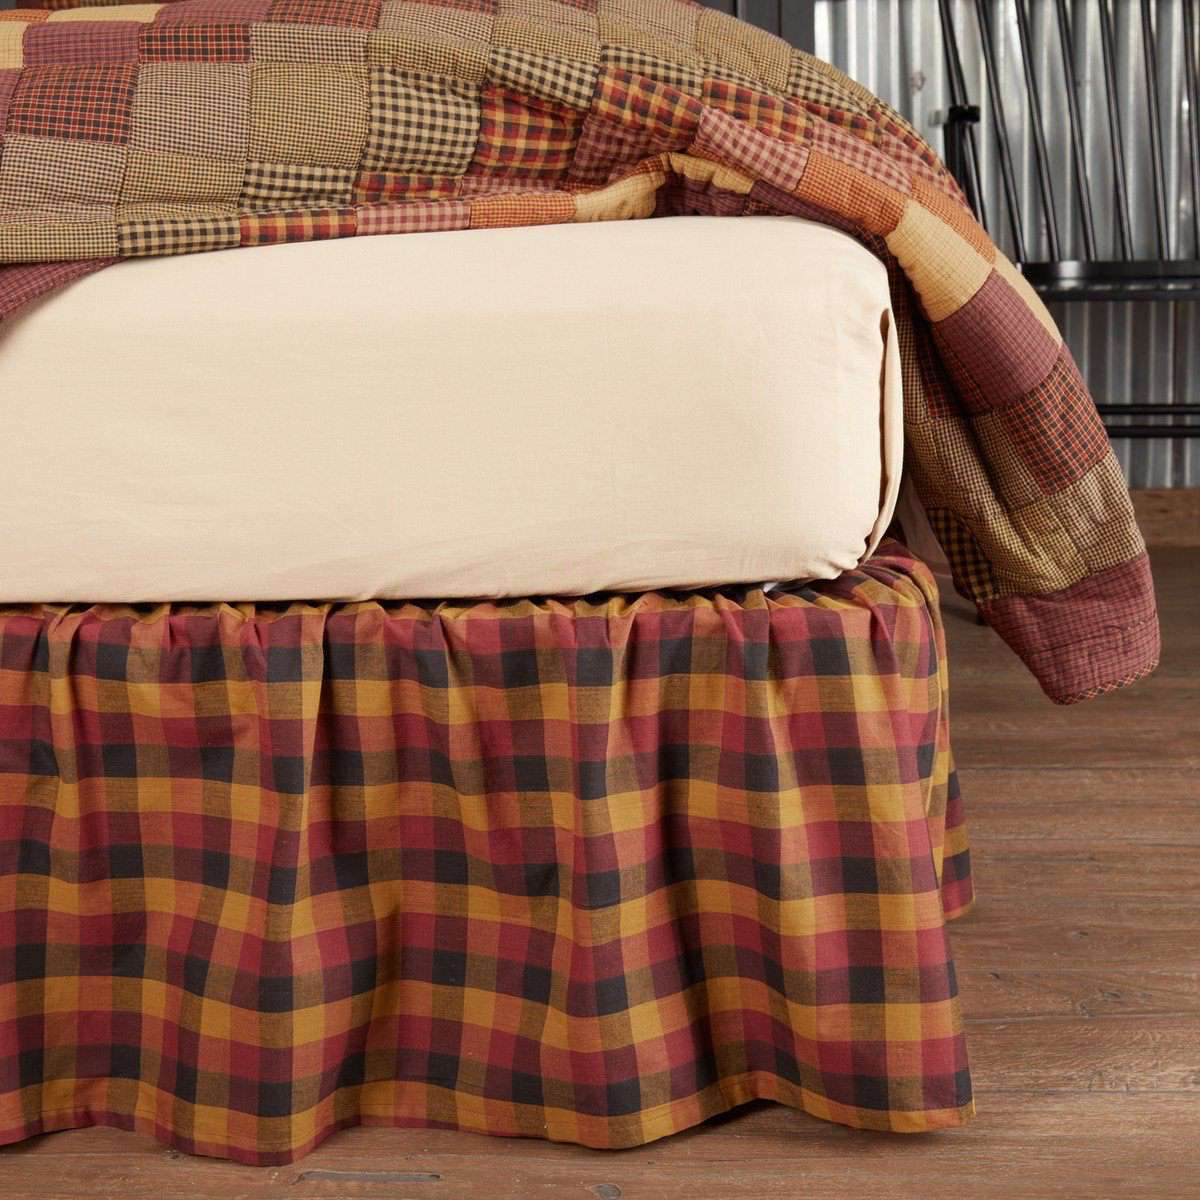 Heritage Farms Primitive Check Bed Skirts VHC Brands - The Fox Decor